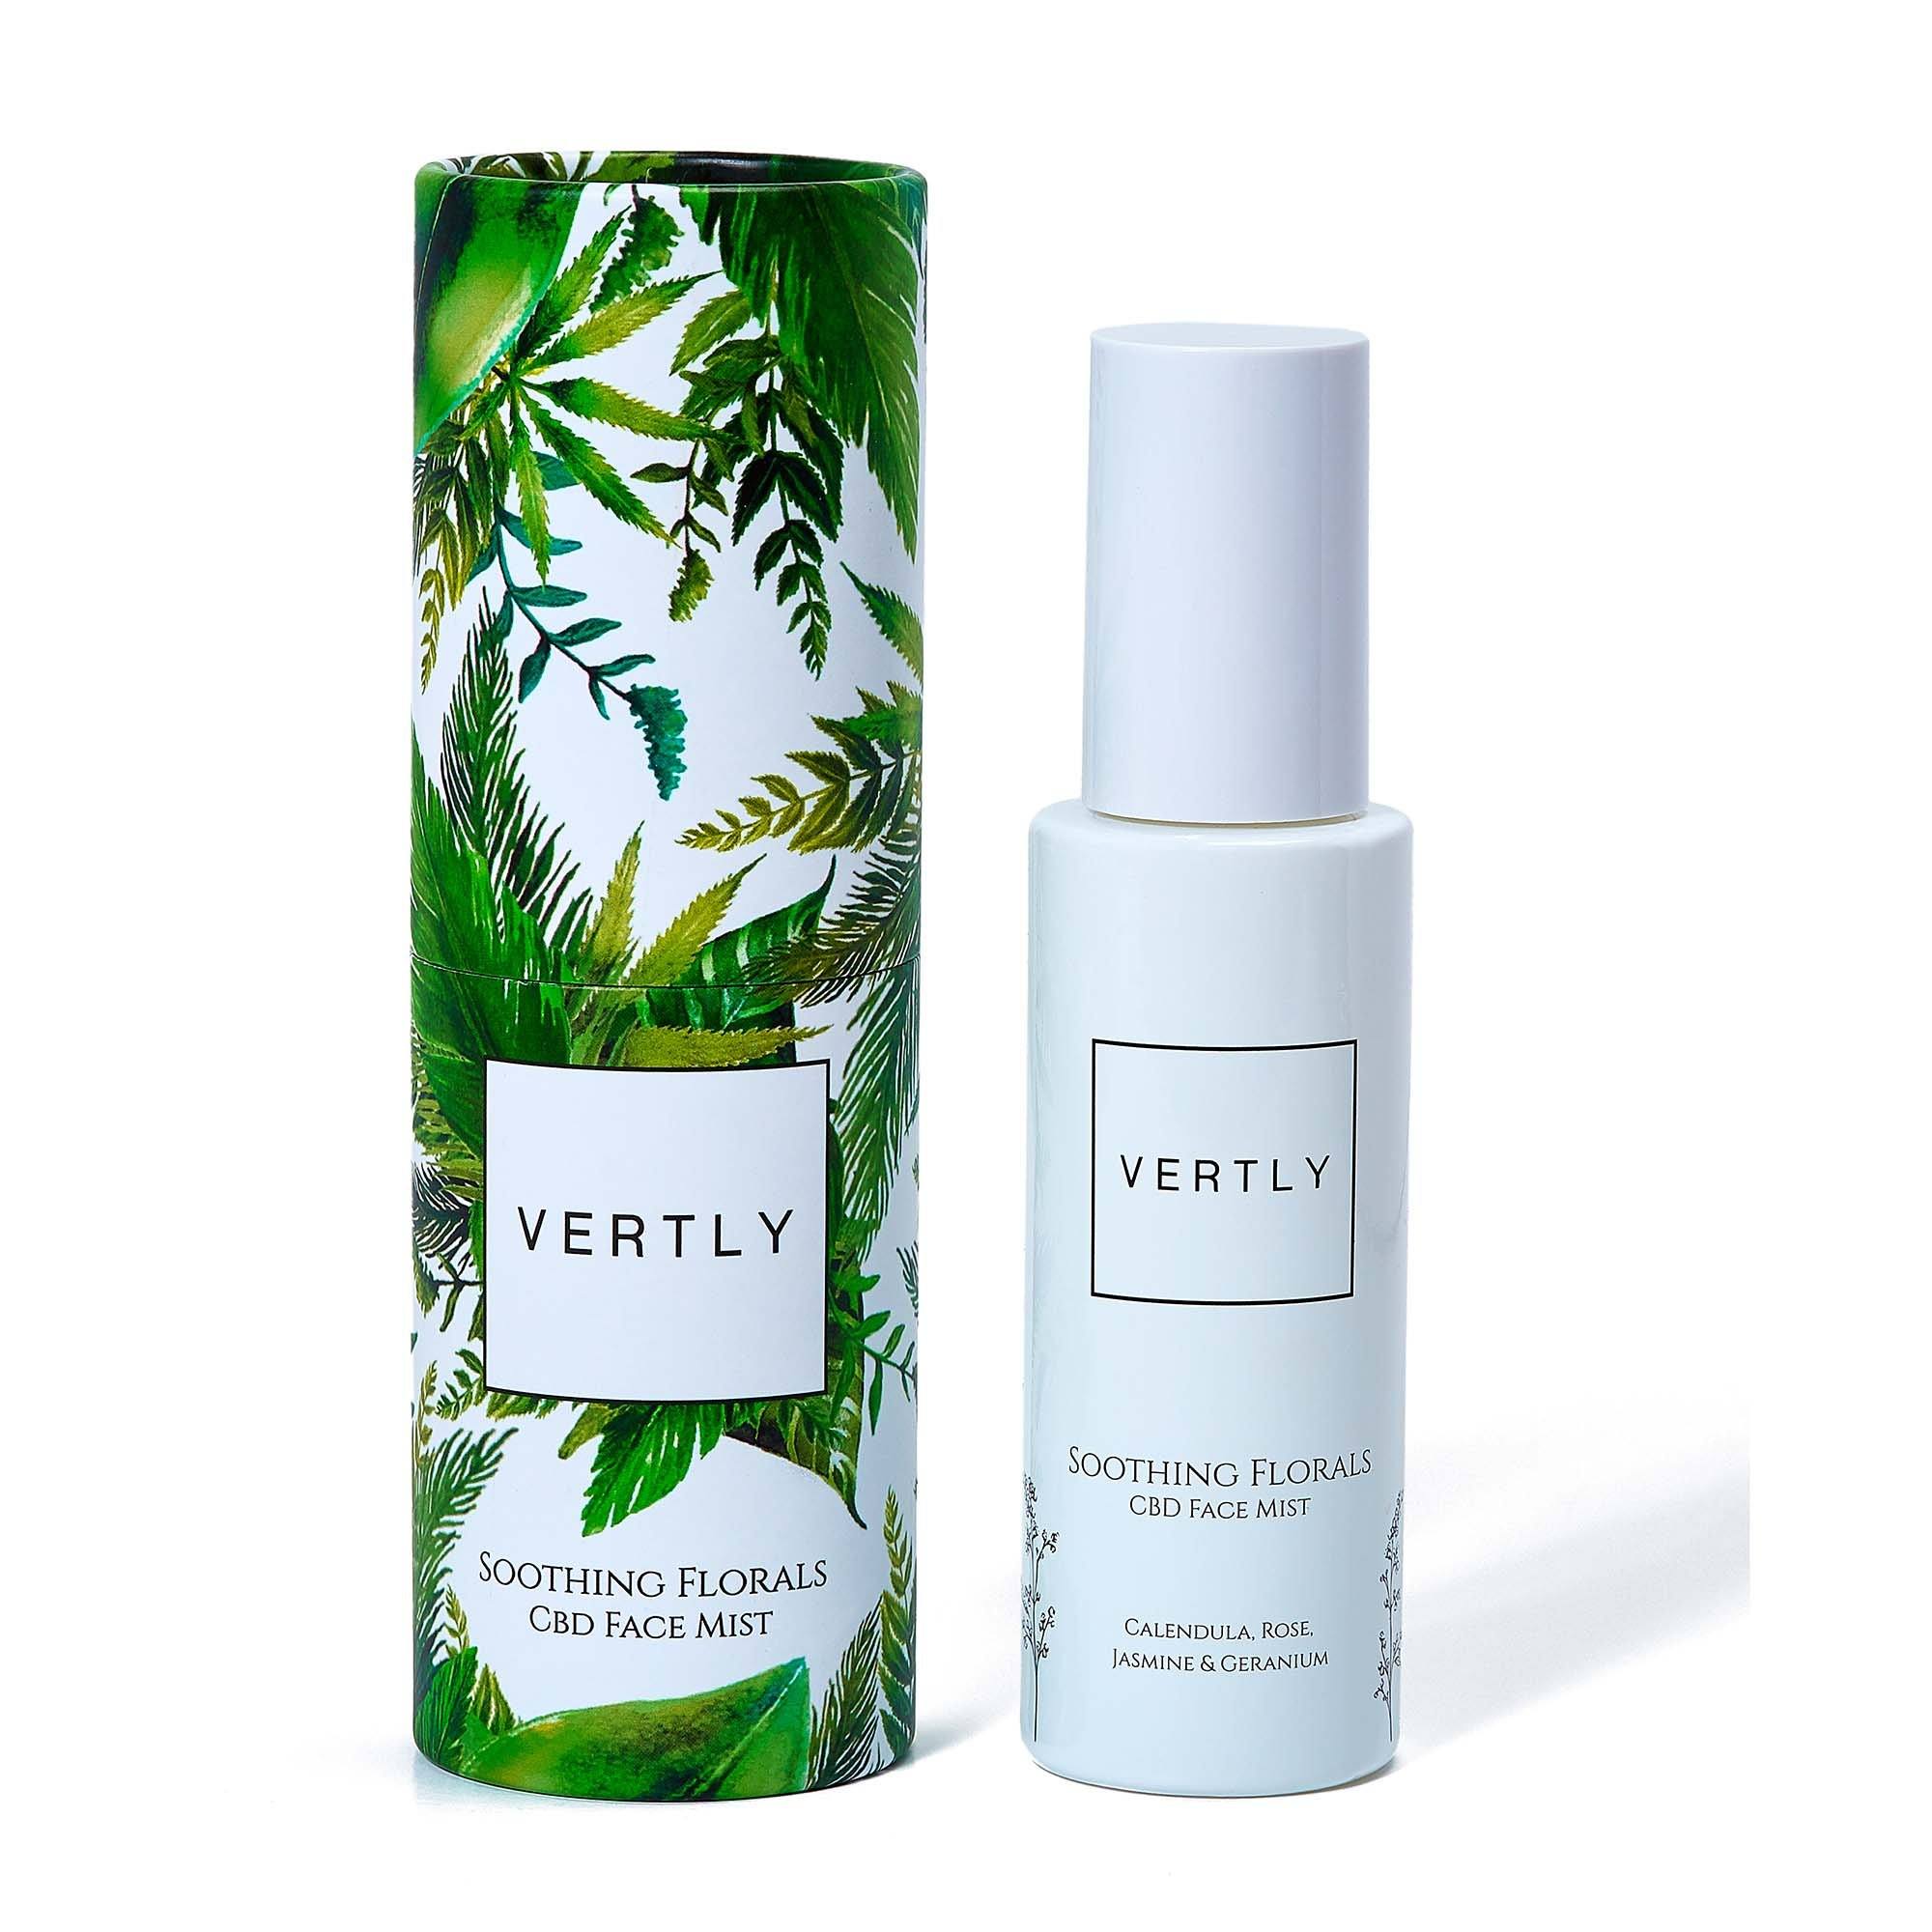 Vertly Soothing floral CBD mist